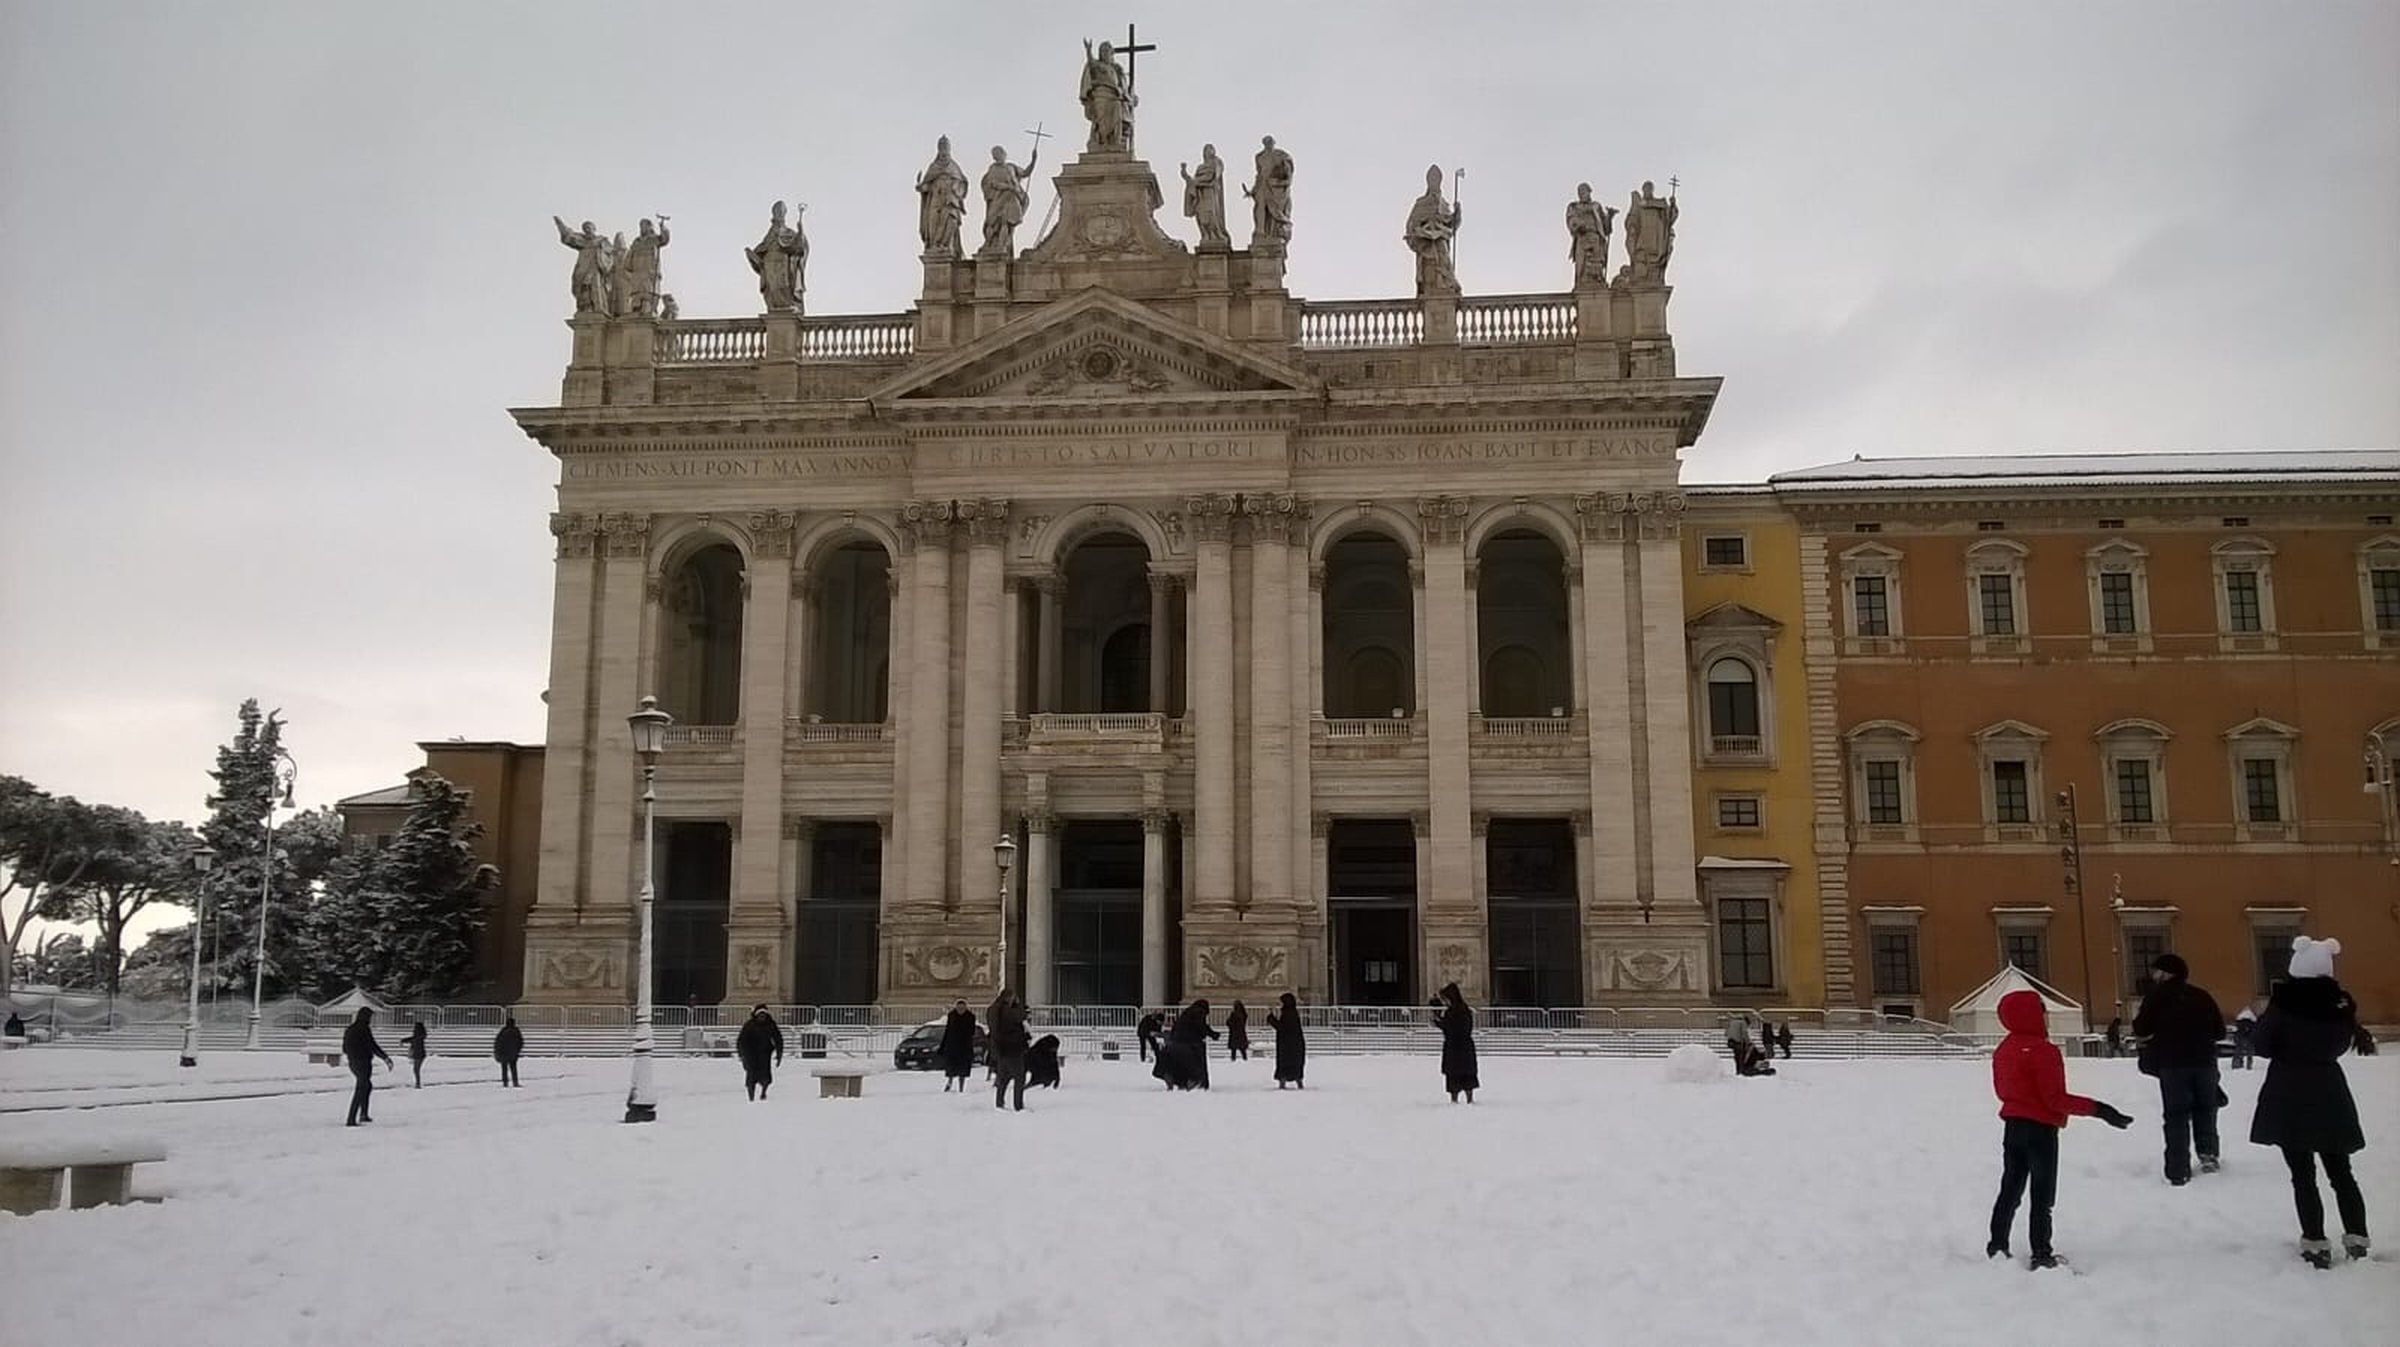 Basilica of St. John Lateran, with nuns playing outside in the snow